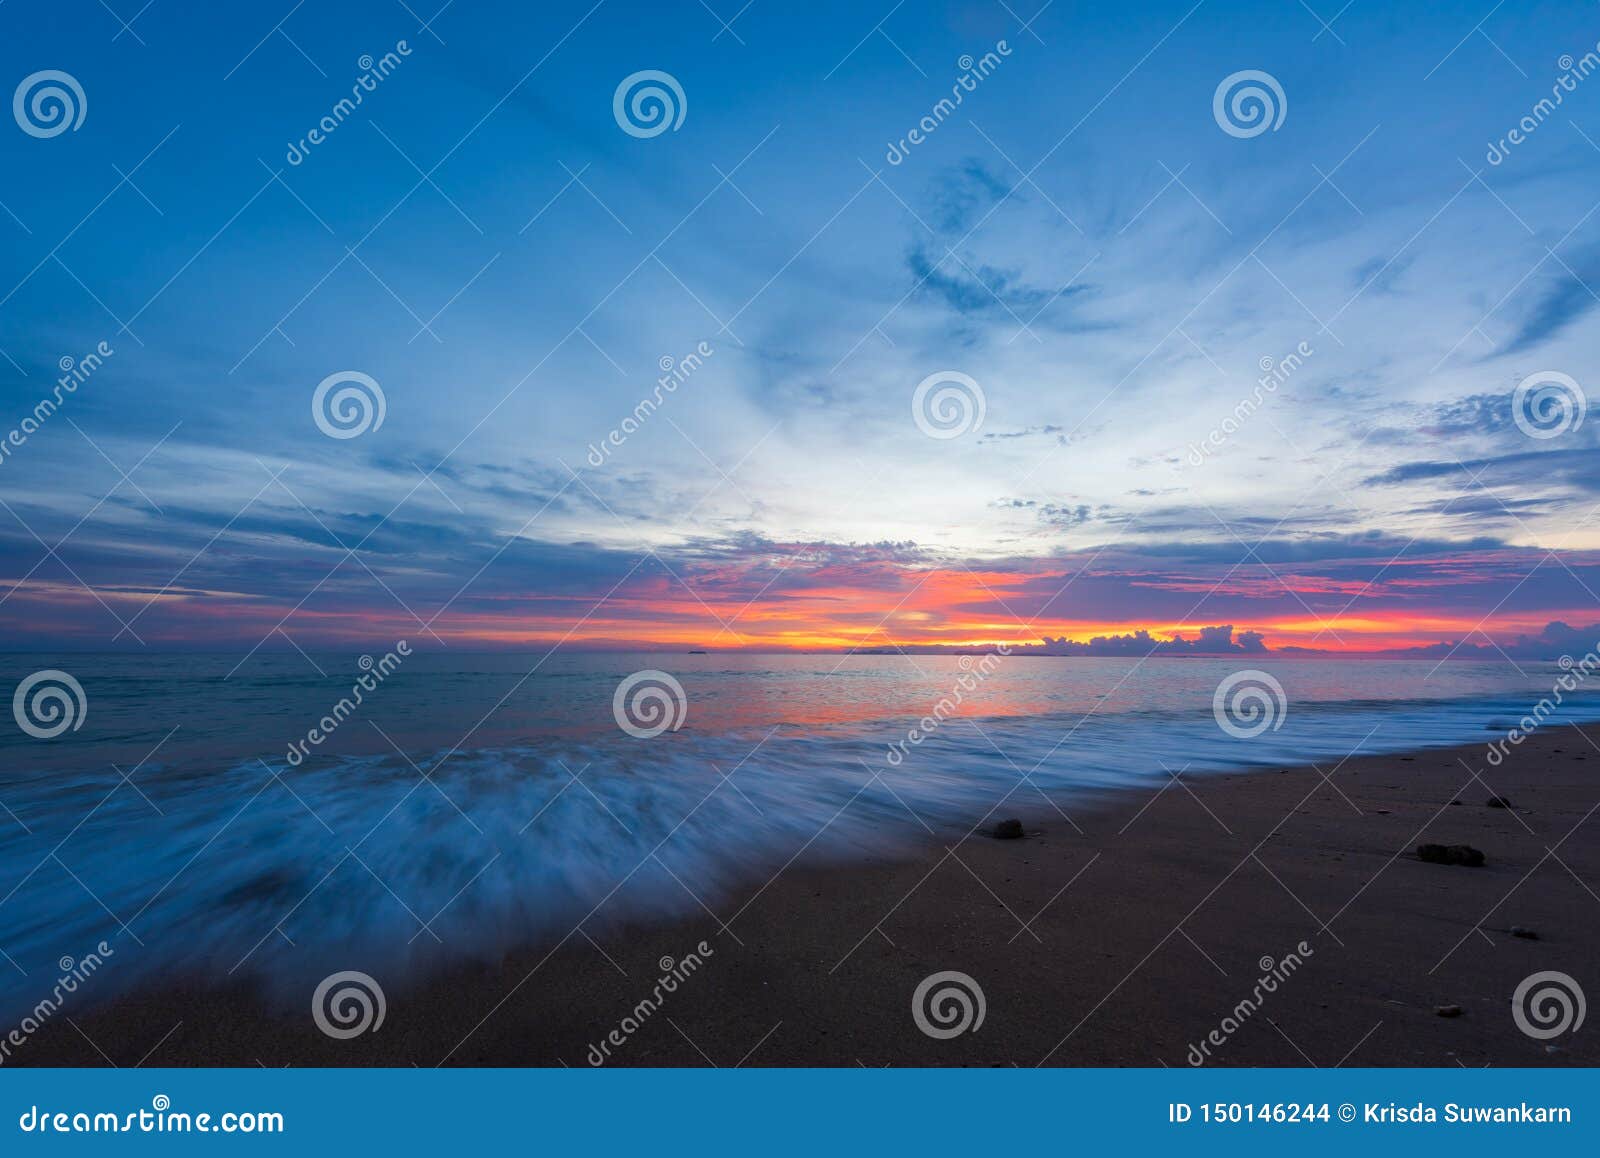 twilight sky with motion of wave